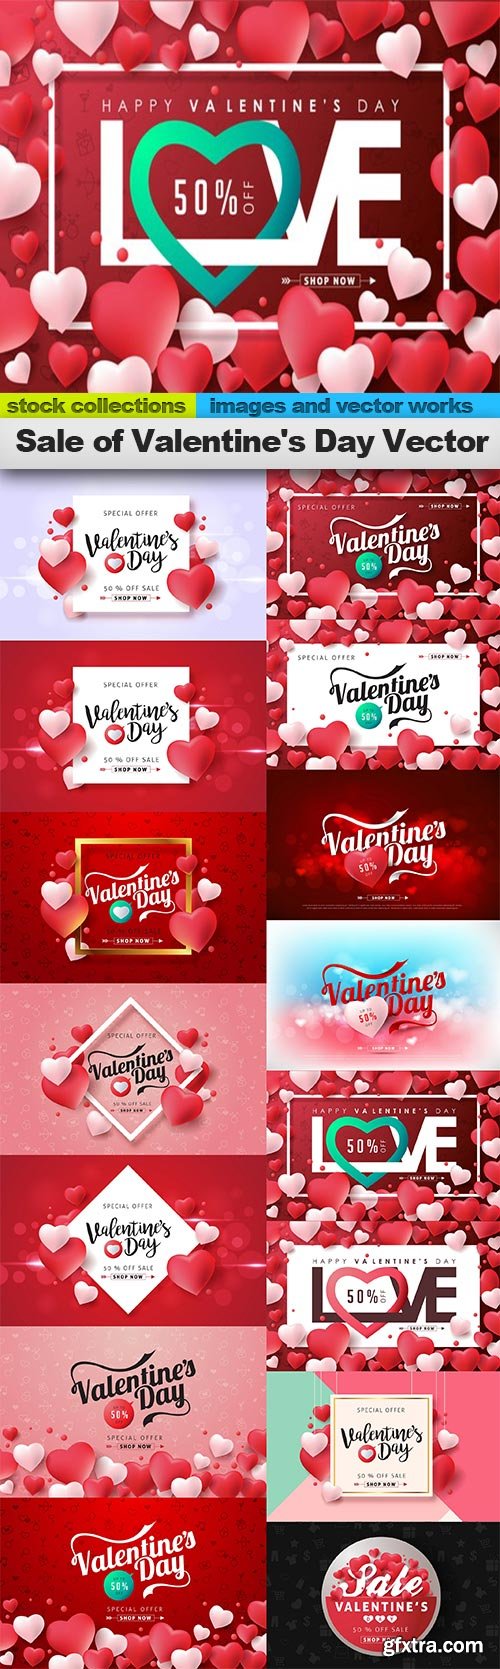 Sale of Valentine\'s Day Vector, 15 x EPS